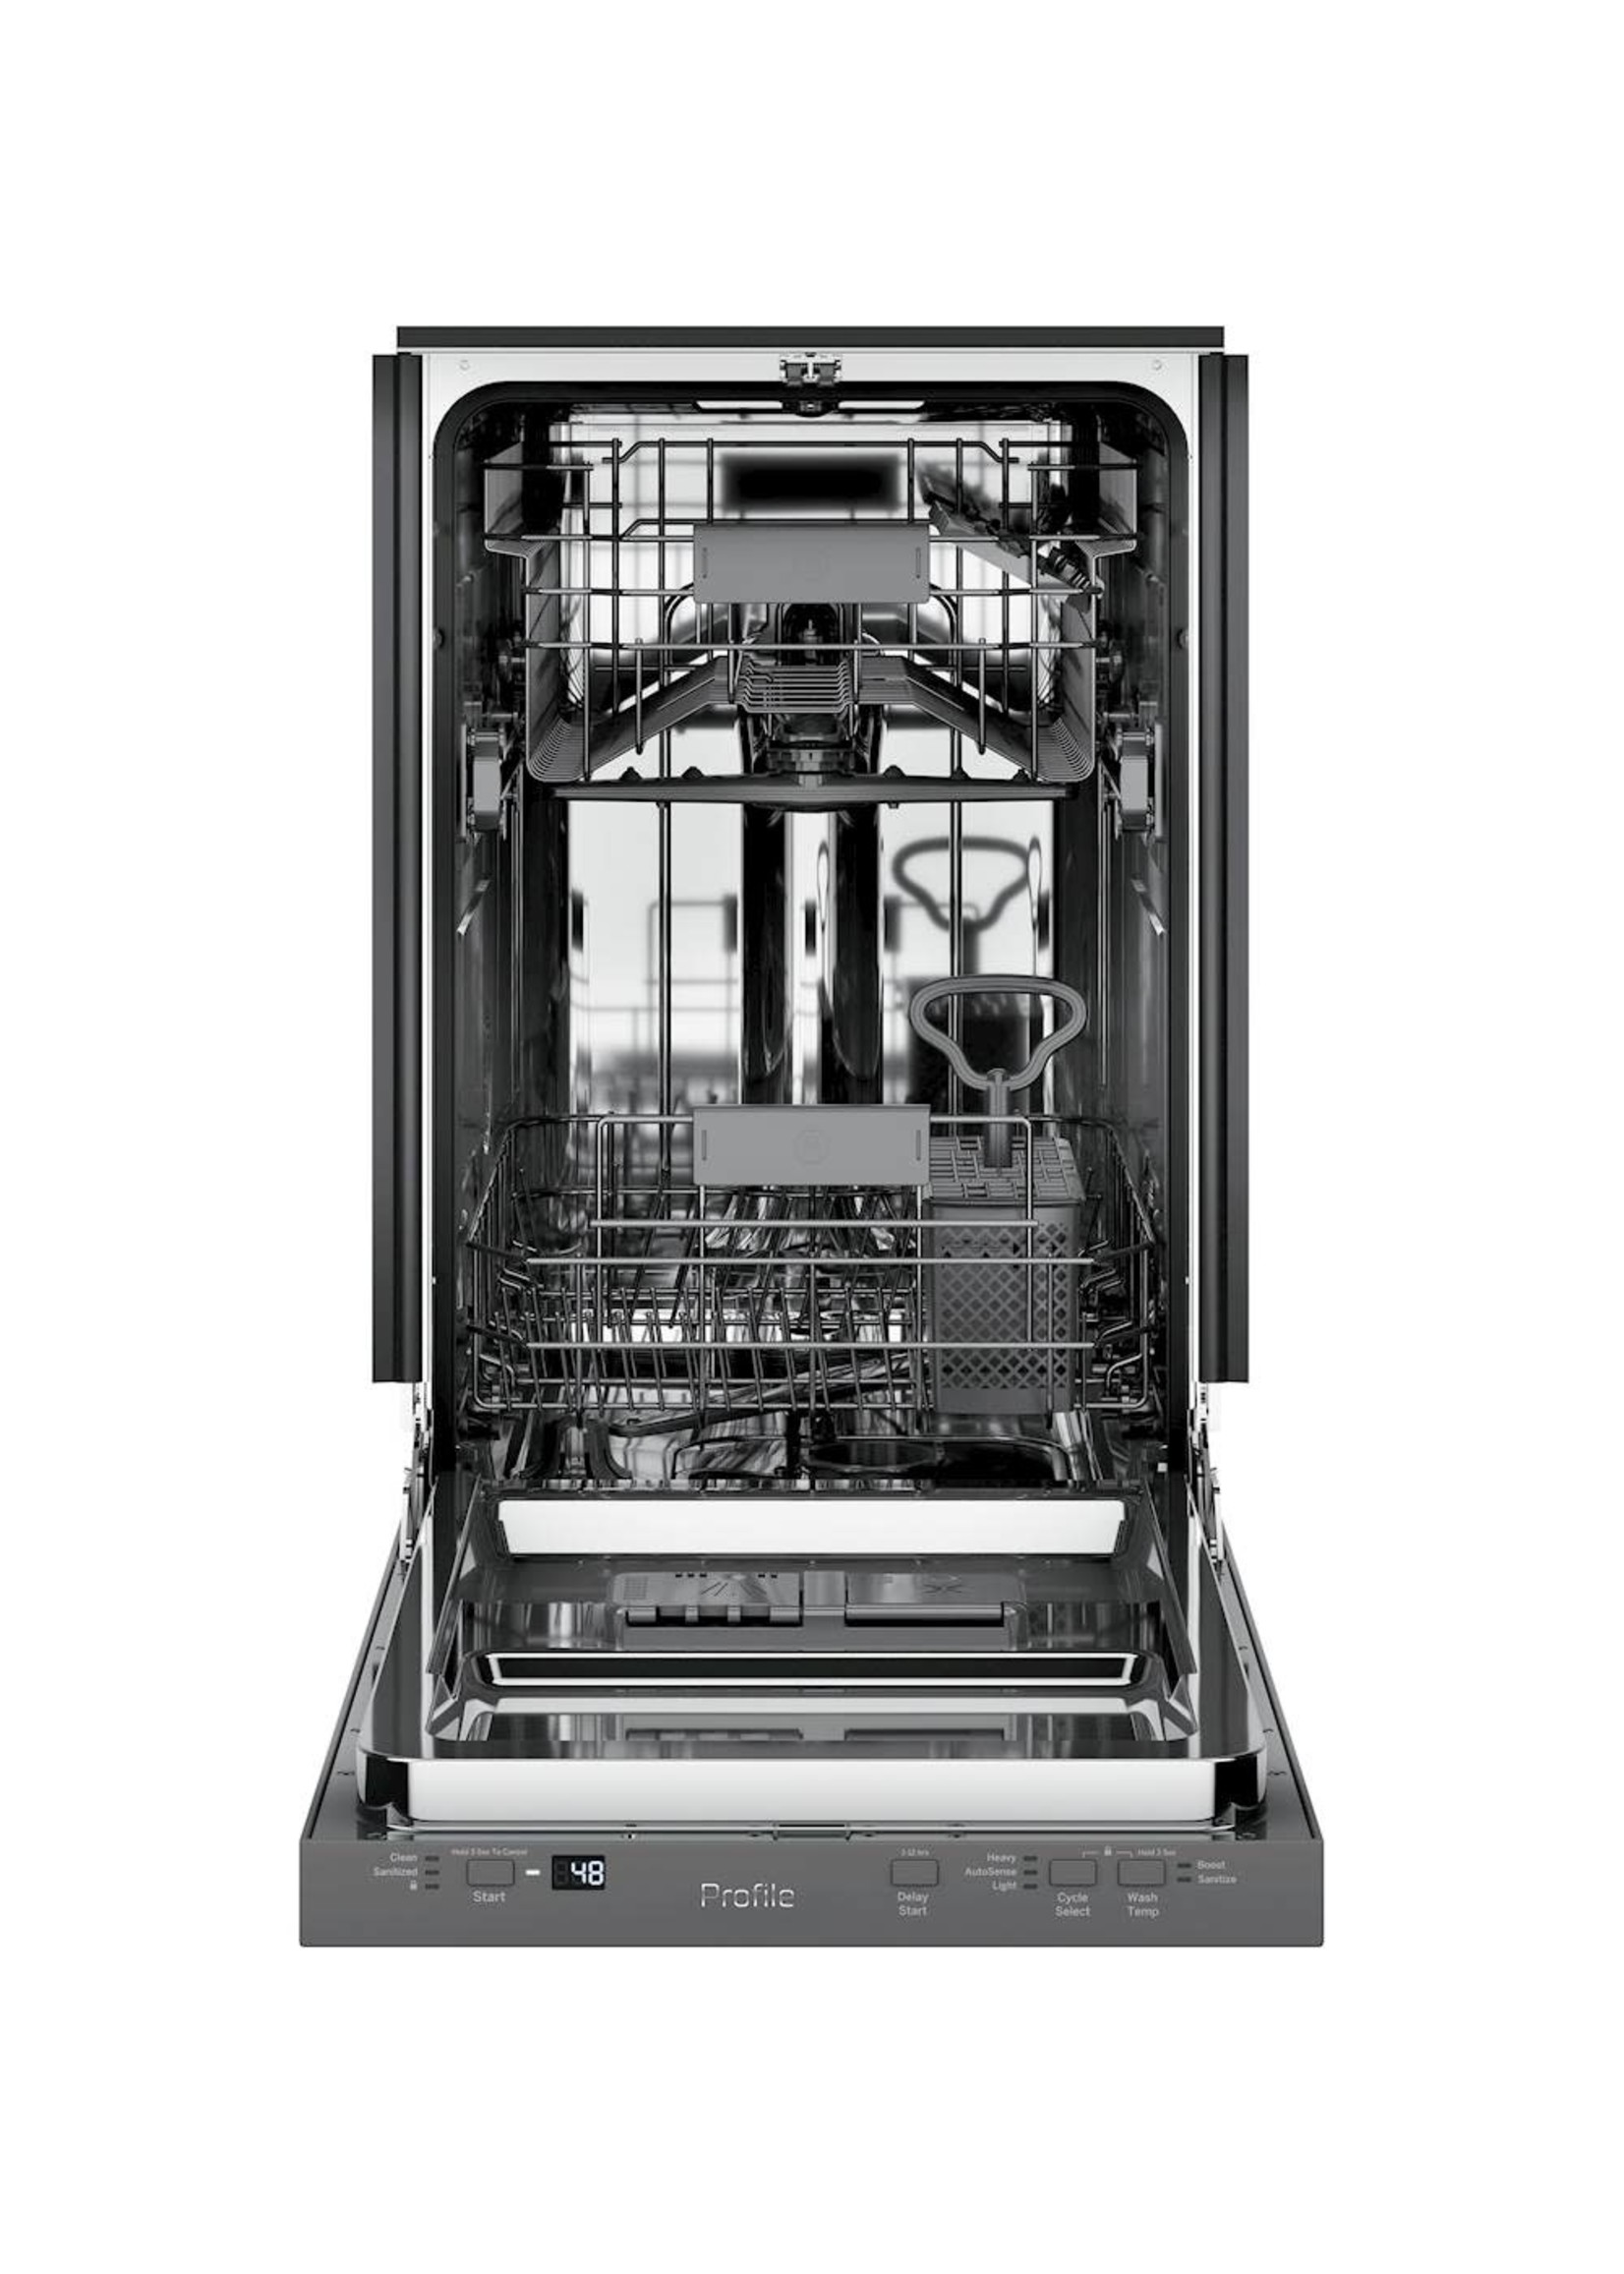 Ge Profile 18" Top Control Built-In Dishwasher with Stainless Steel Tub - Stainless steel